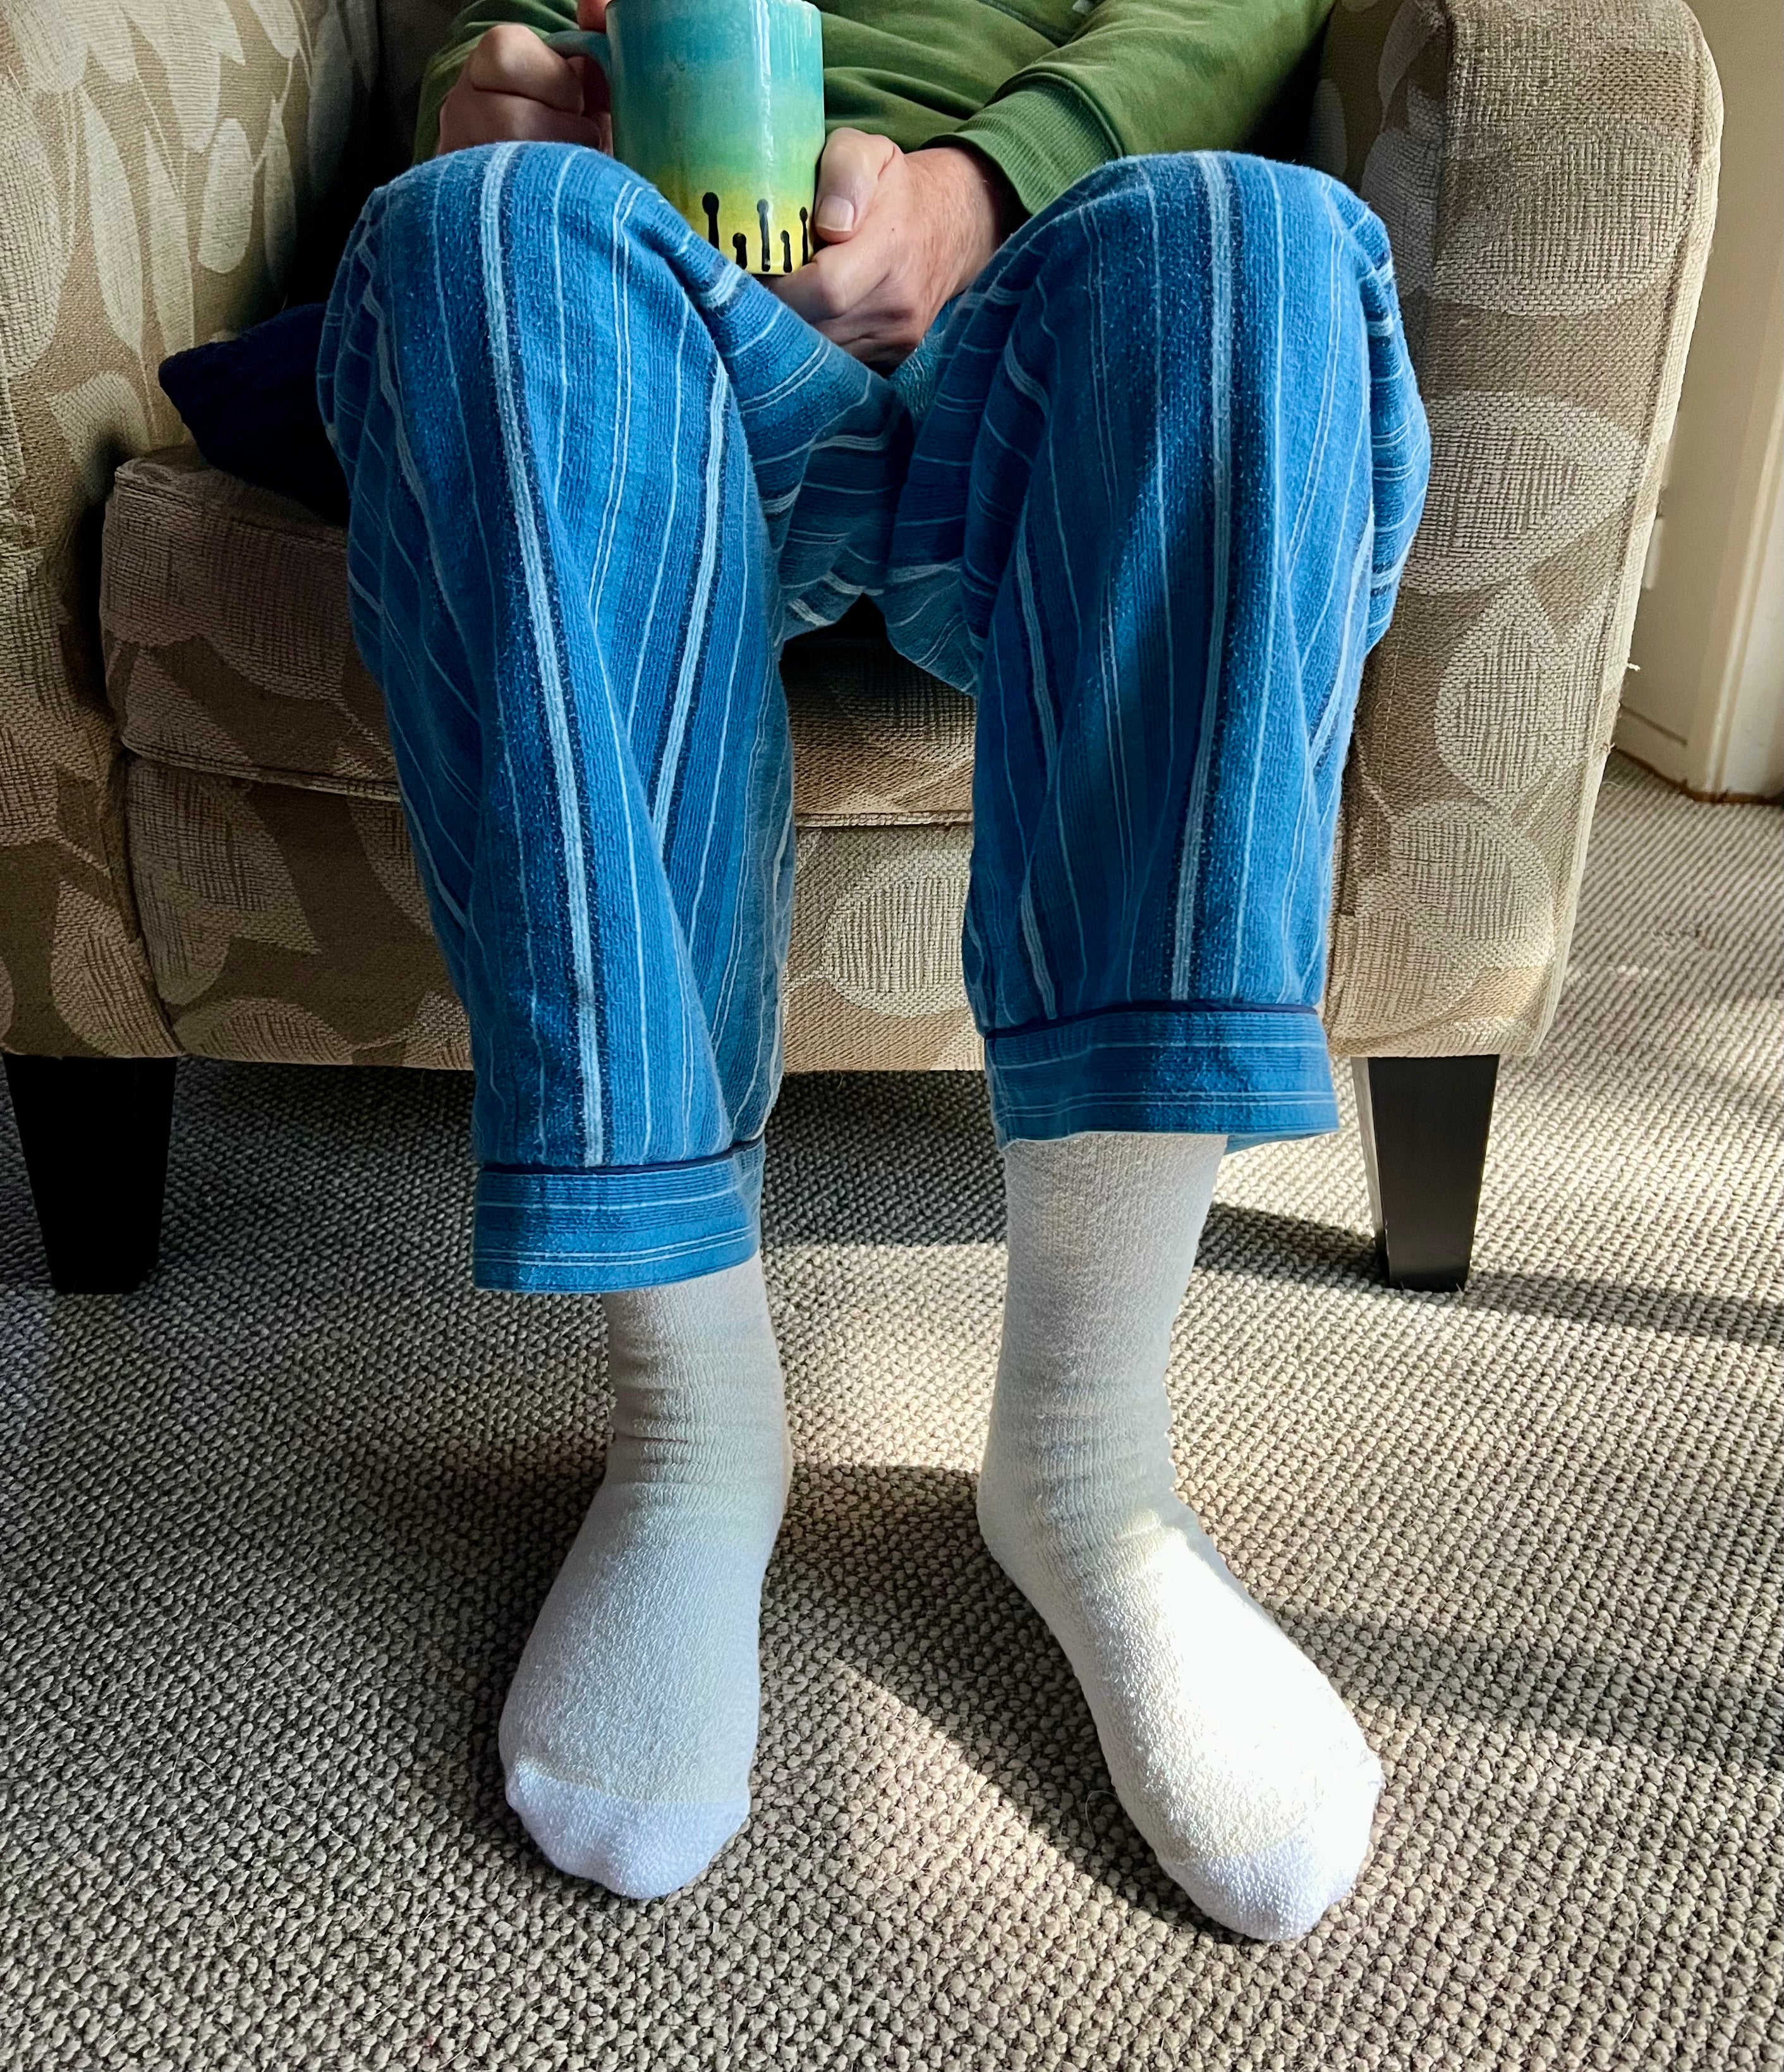 Man wearing pjs and white bedsocks - the sockery